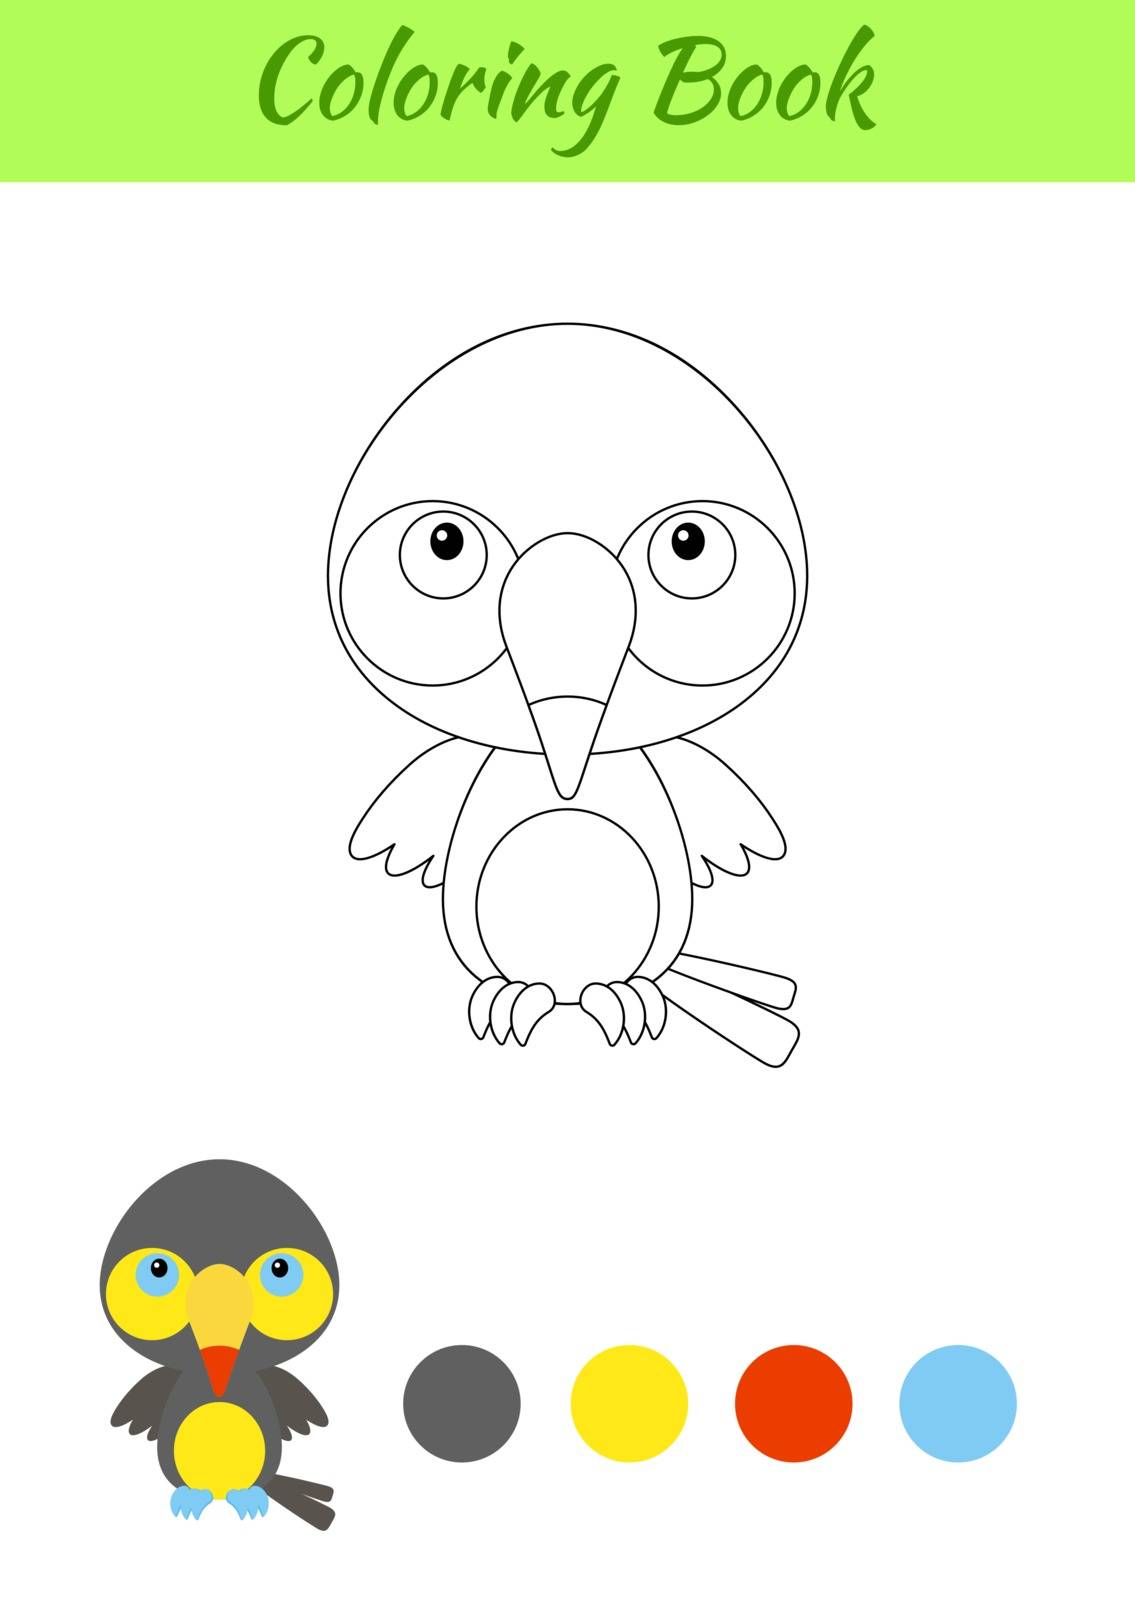 Coloring page happy little baby toucan. Printable coloring book for kids. Educational activity for kindergarten and preschool with cute animal. Flat cartoon colorful vector illustration.